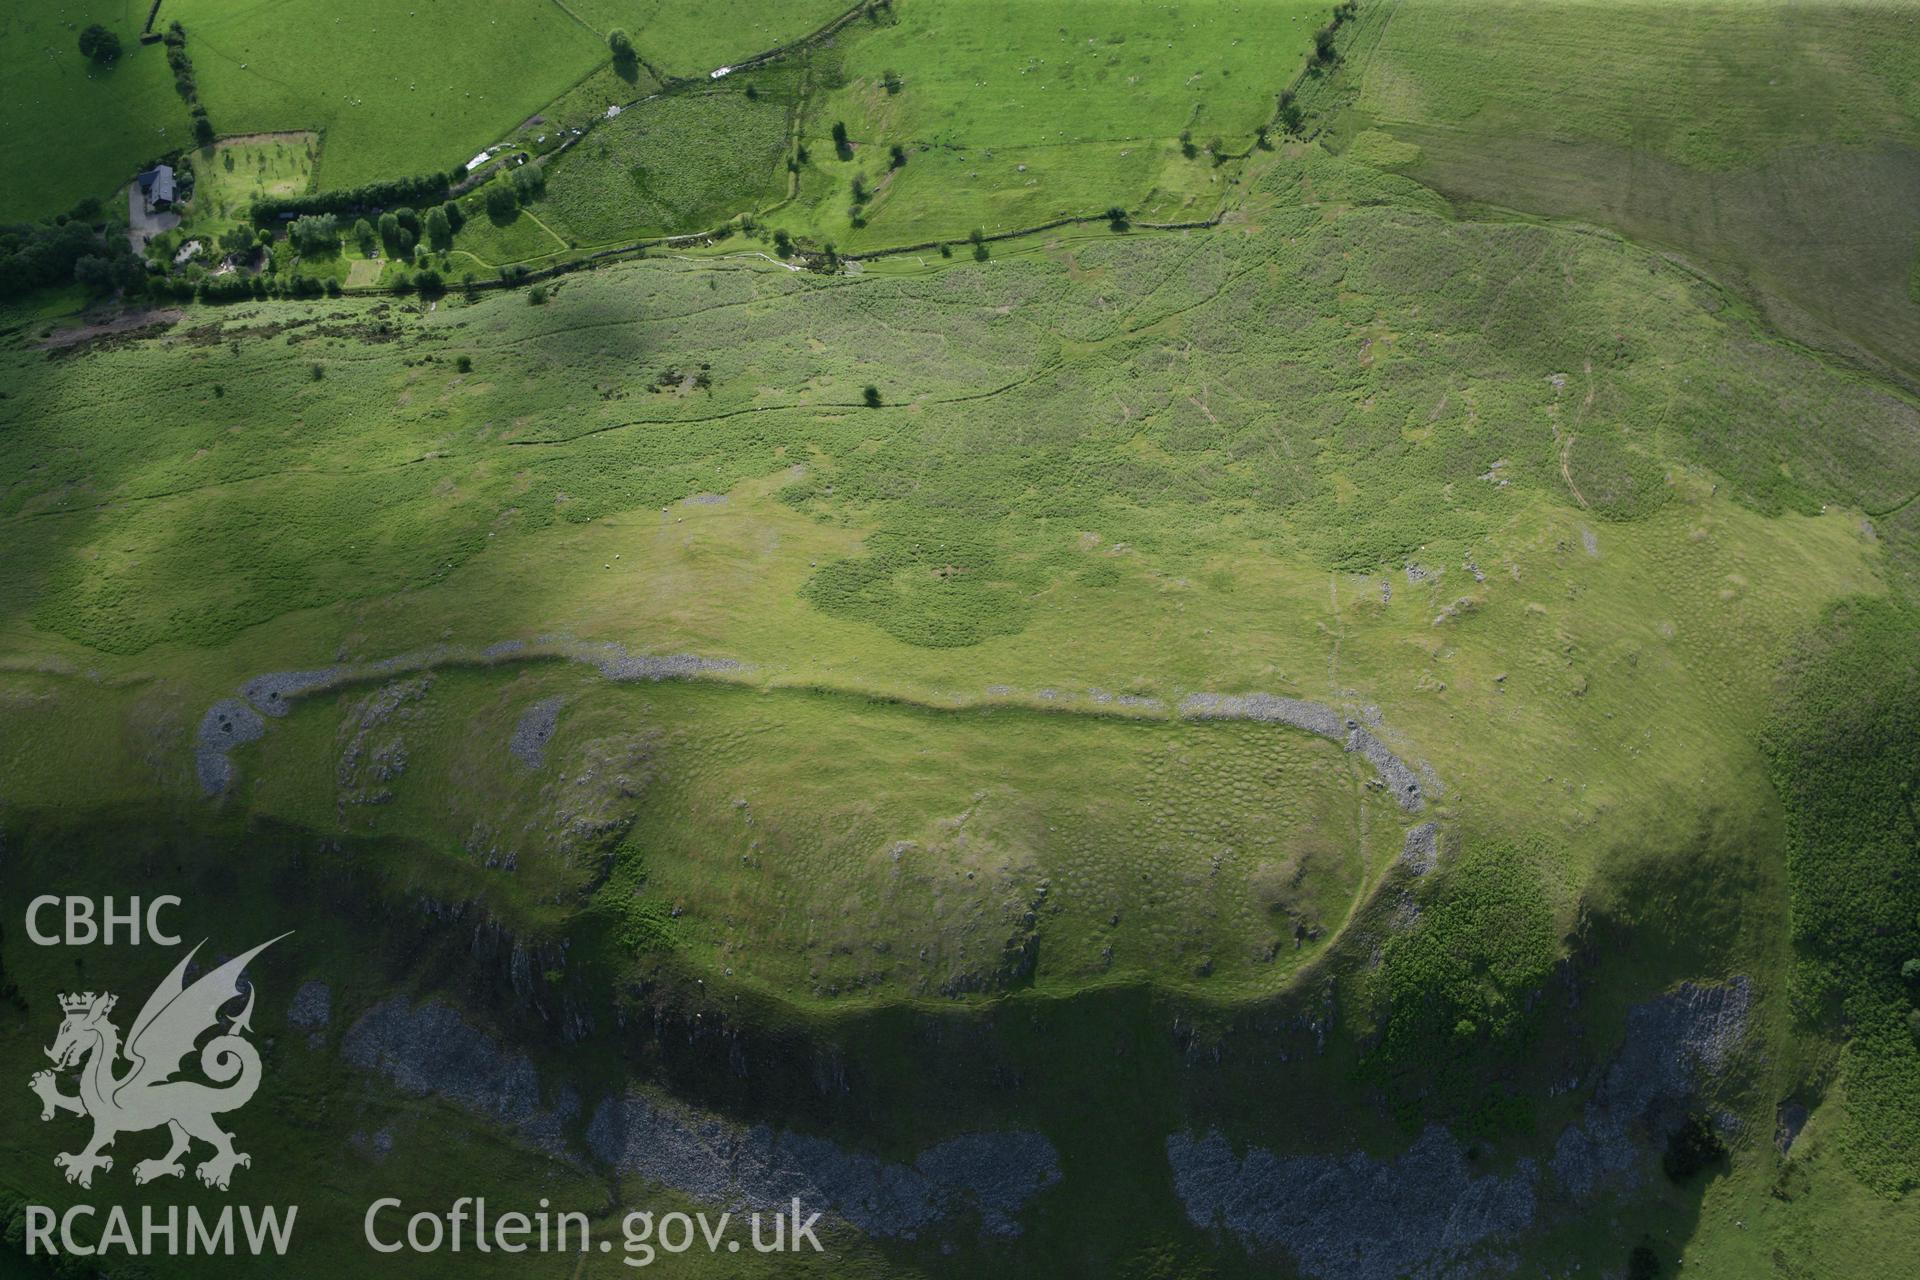 RCAHMW colour oblique photograph of Castle Bank hillfort. Taken by Toby Driver on 13/06/2011.